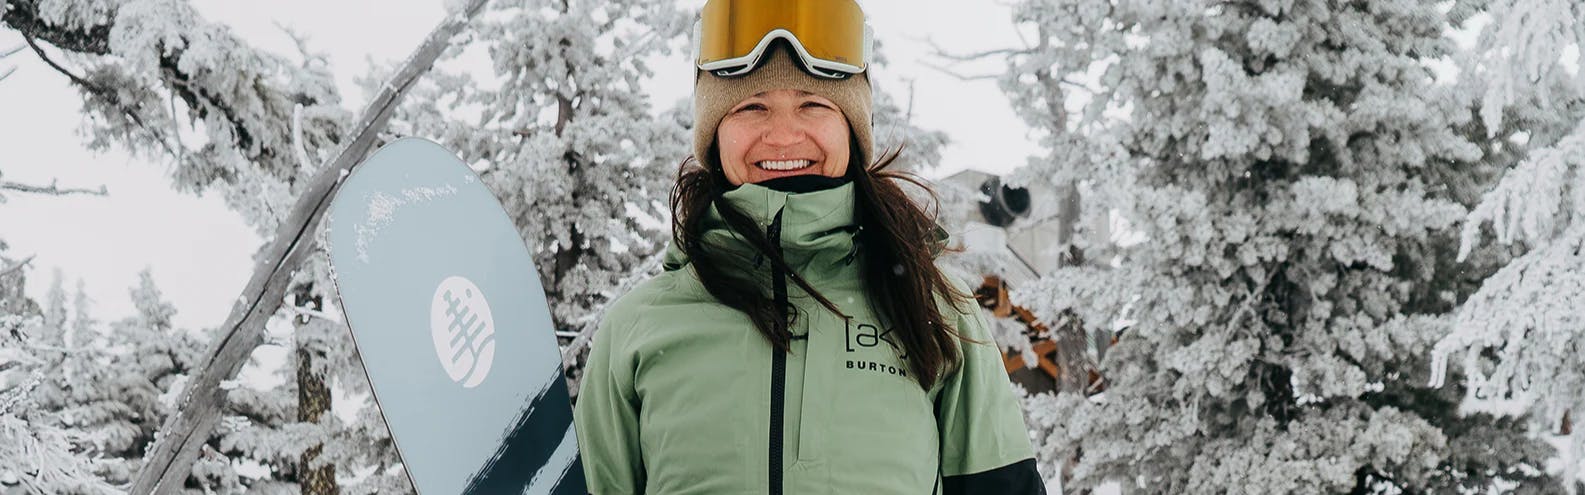 The Top 6 Most Recommended Burton Women's Snowboard Jackets